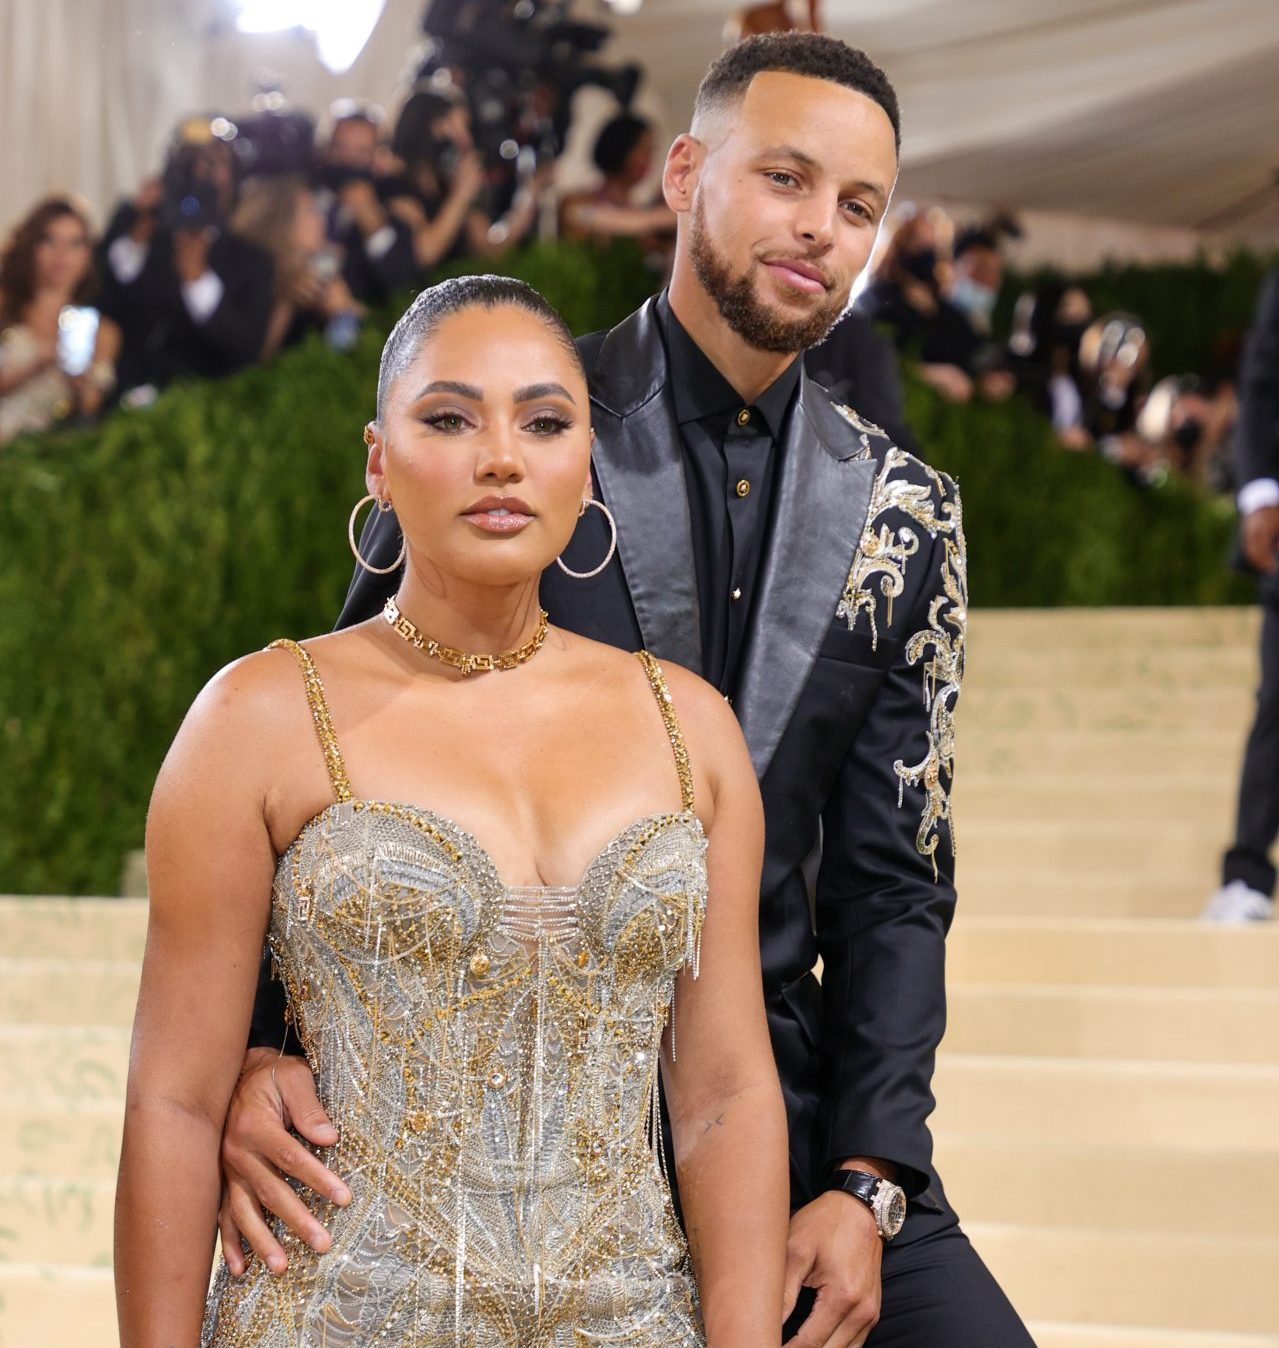 Steph & Ayesha Curry Get Sexy On The Dancefloor To Celebrate The Golden State Warriors Recent Championship Win